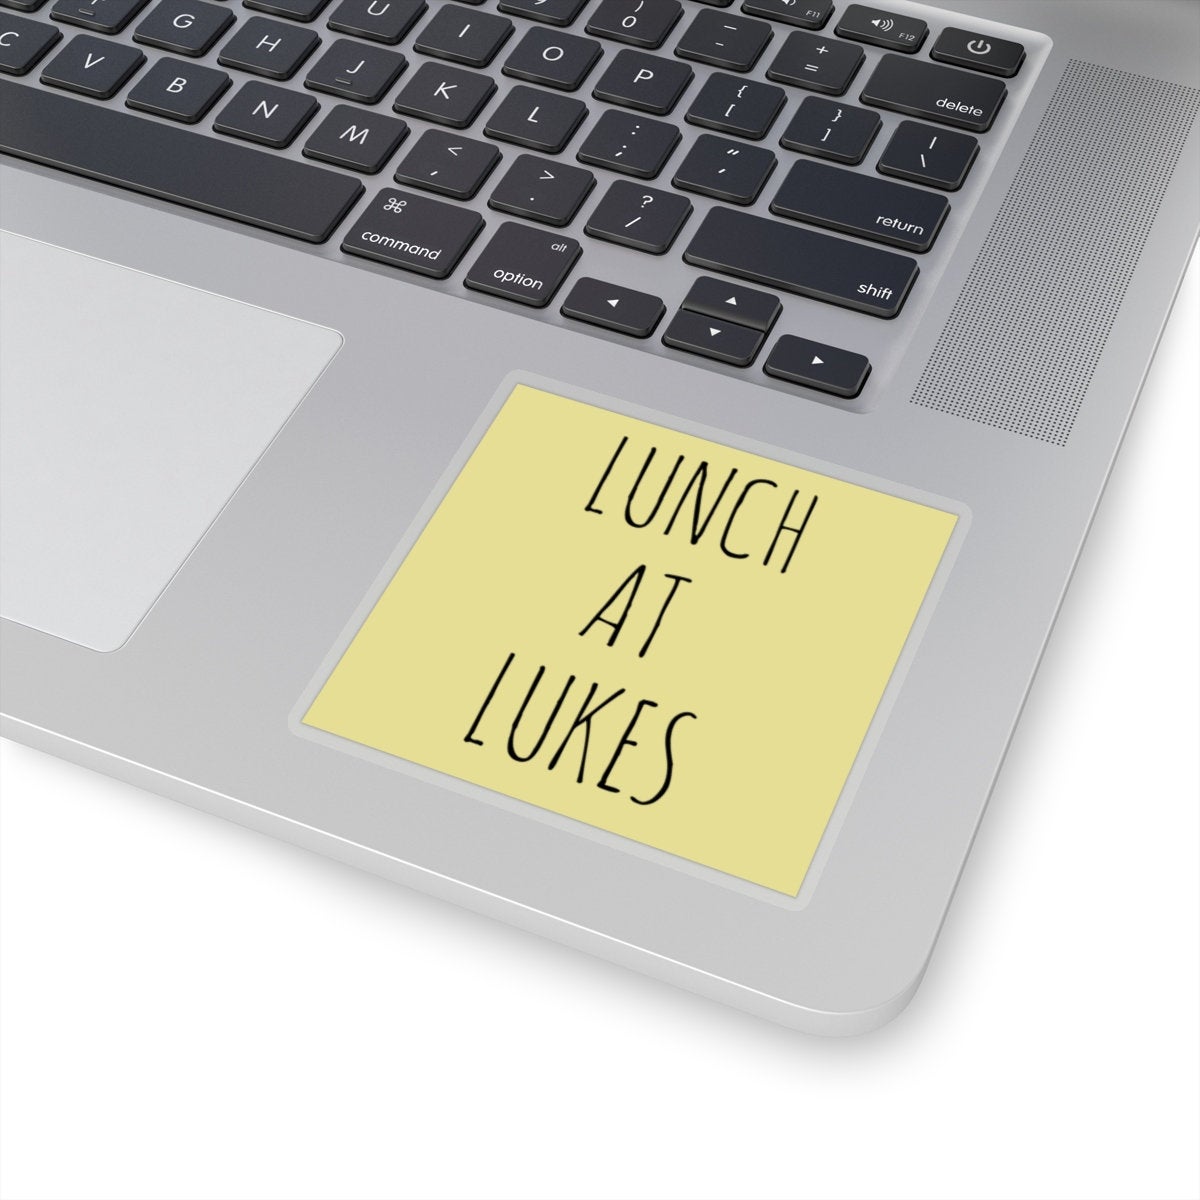 Lunch at Lukes Sticker